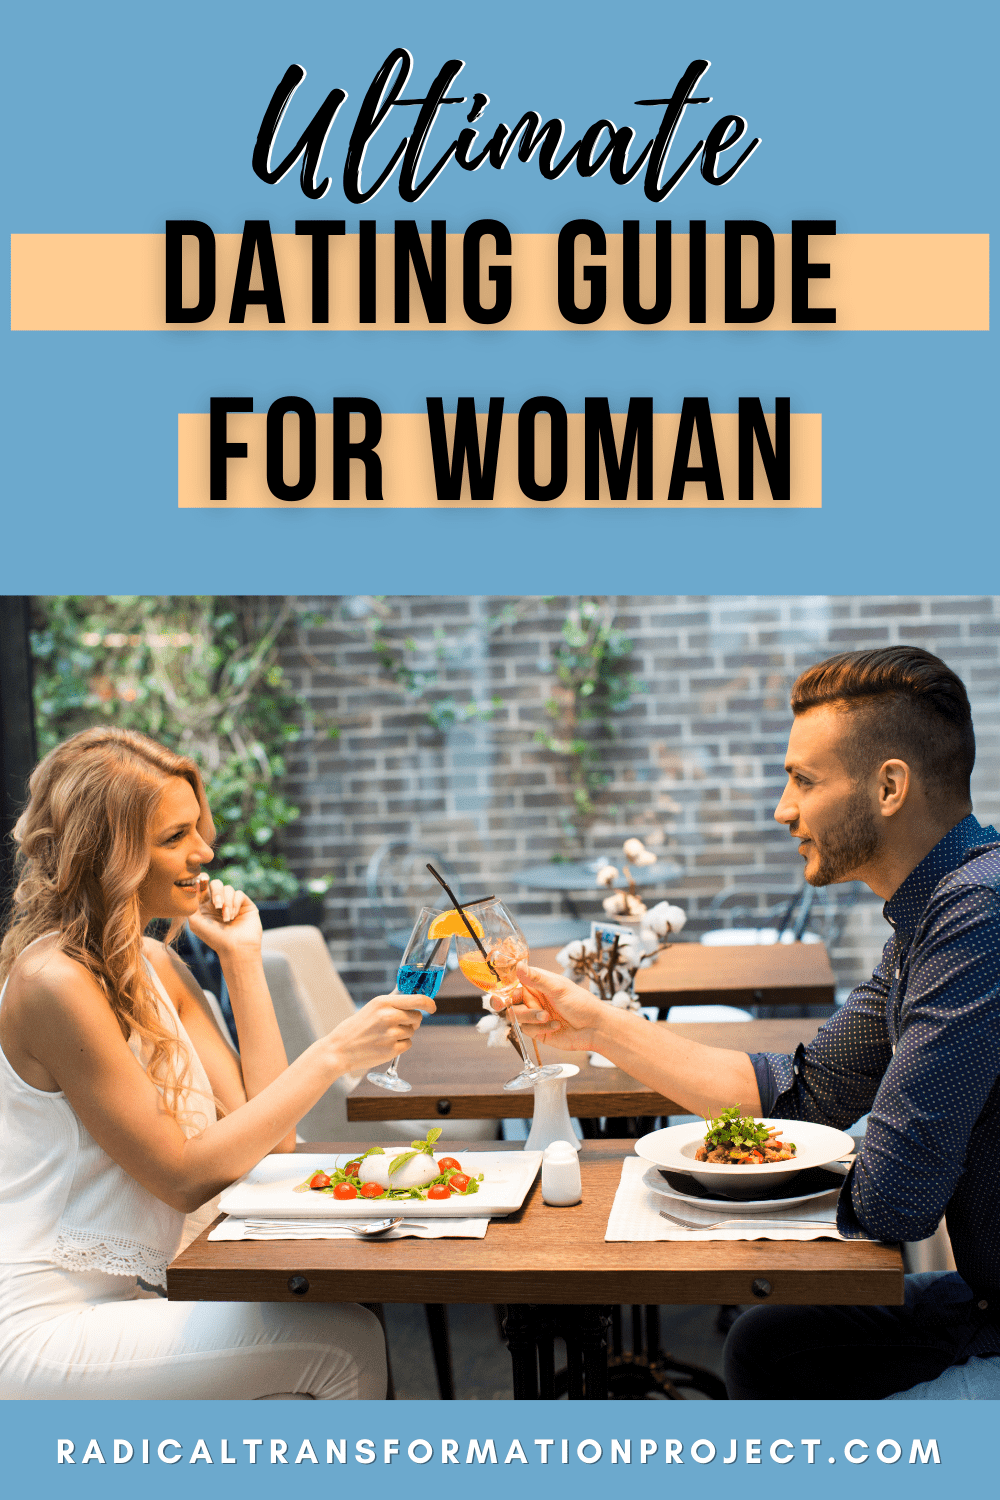 Ultimate Dating Guide for Women